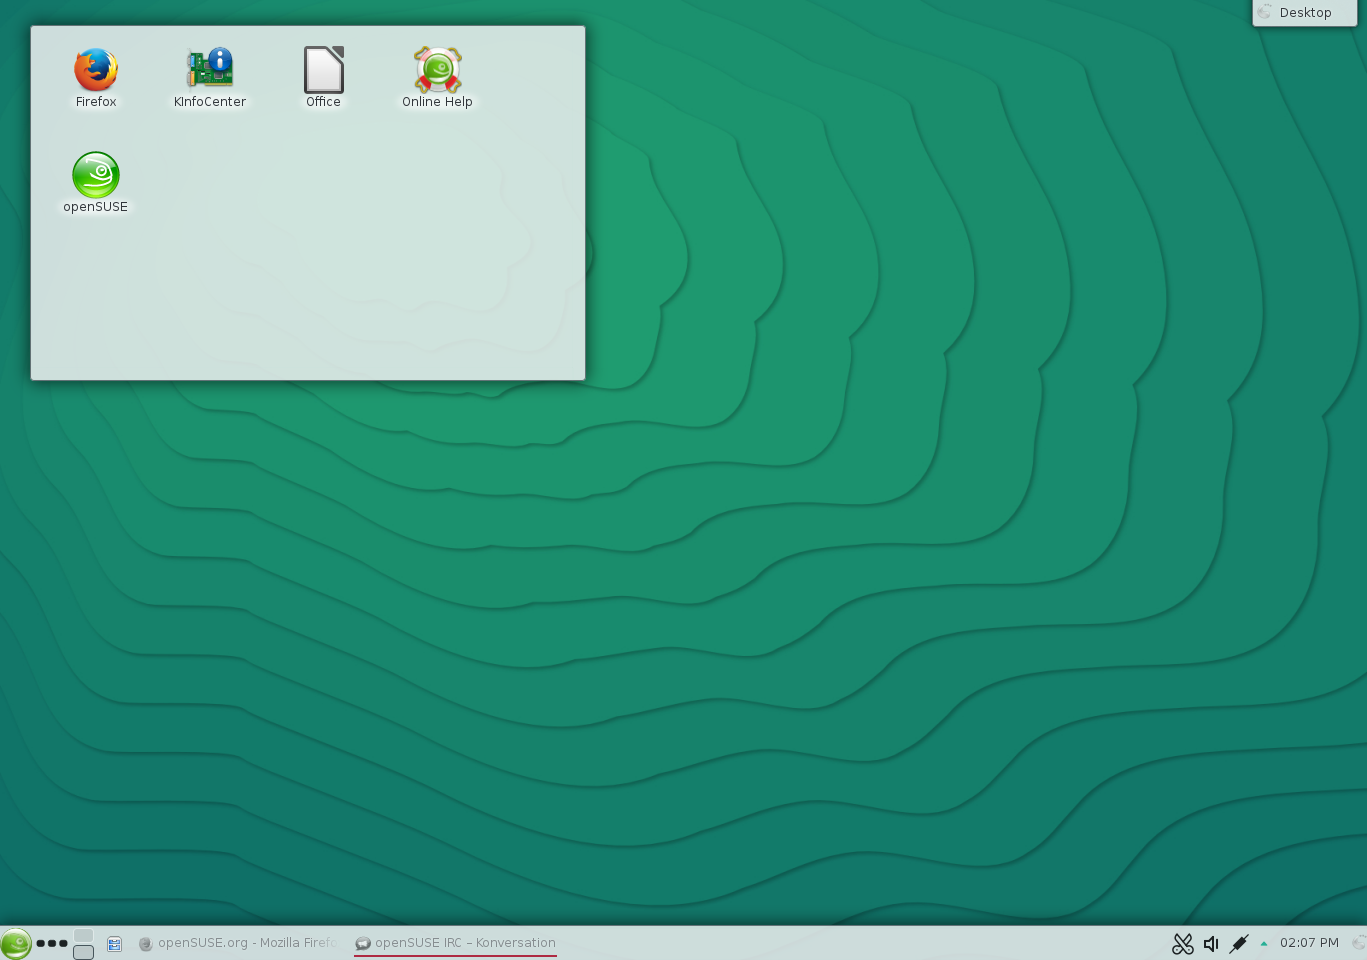 Opensuse13.2-KDE-01.png